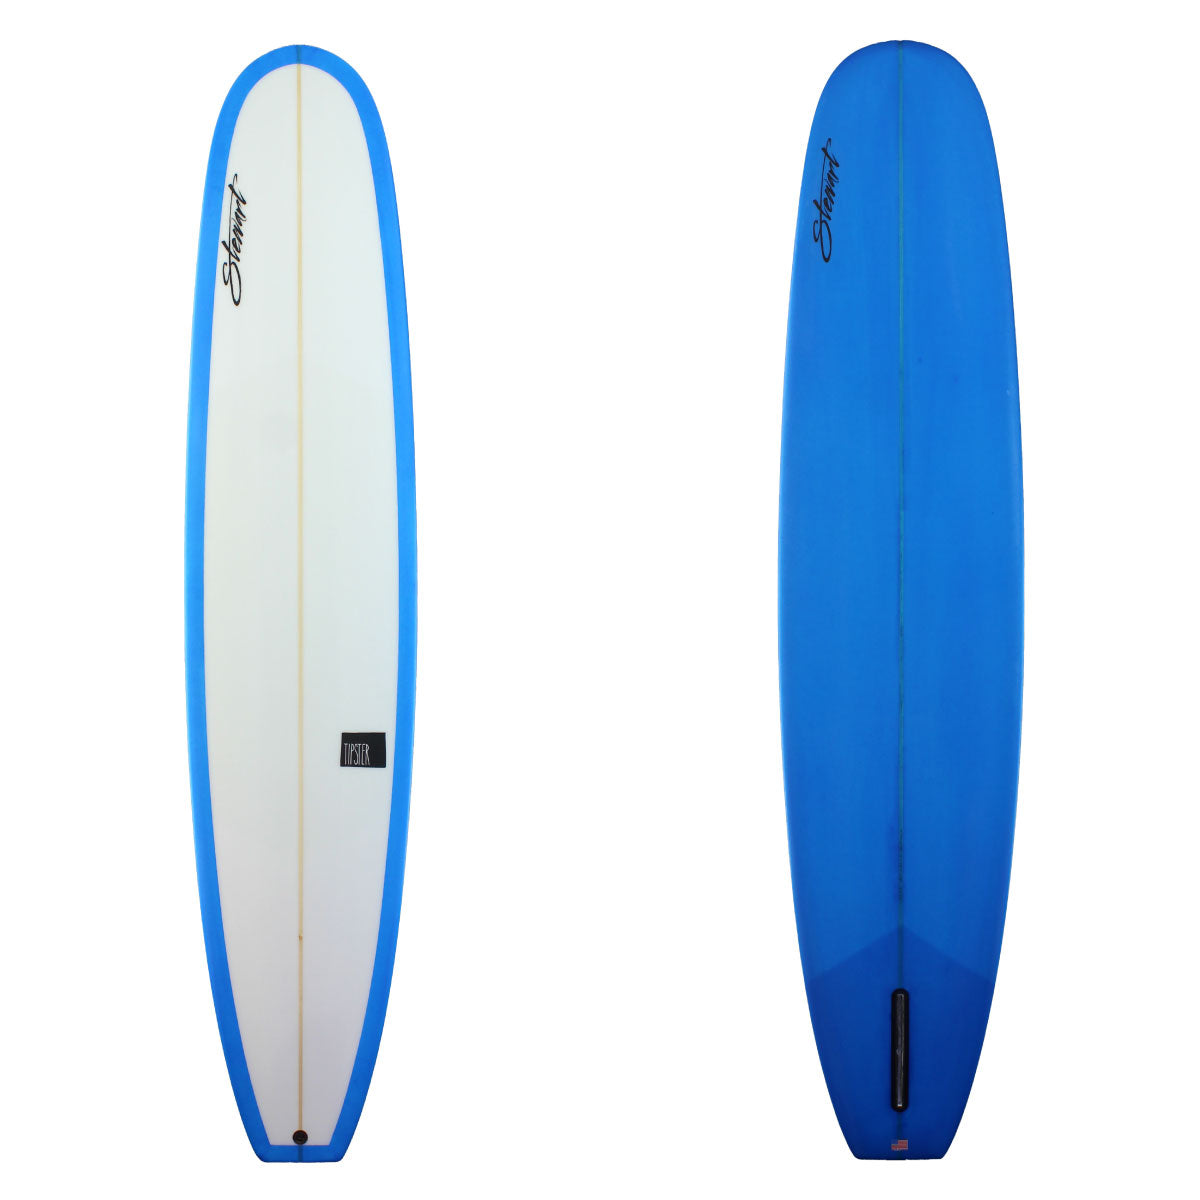 Stewart Surfboards 9'2 TIPSTER with blue resin tint bottom and rails